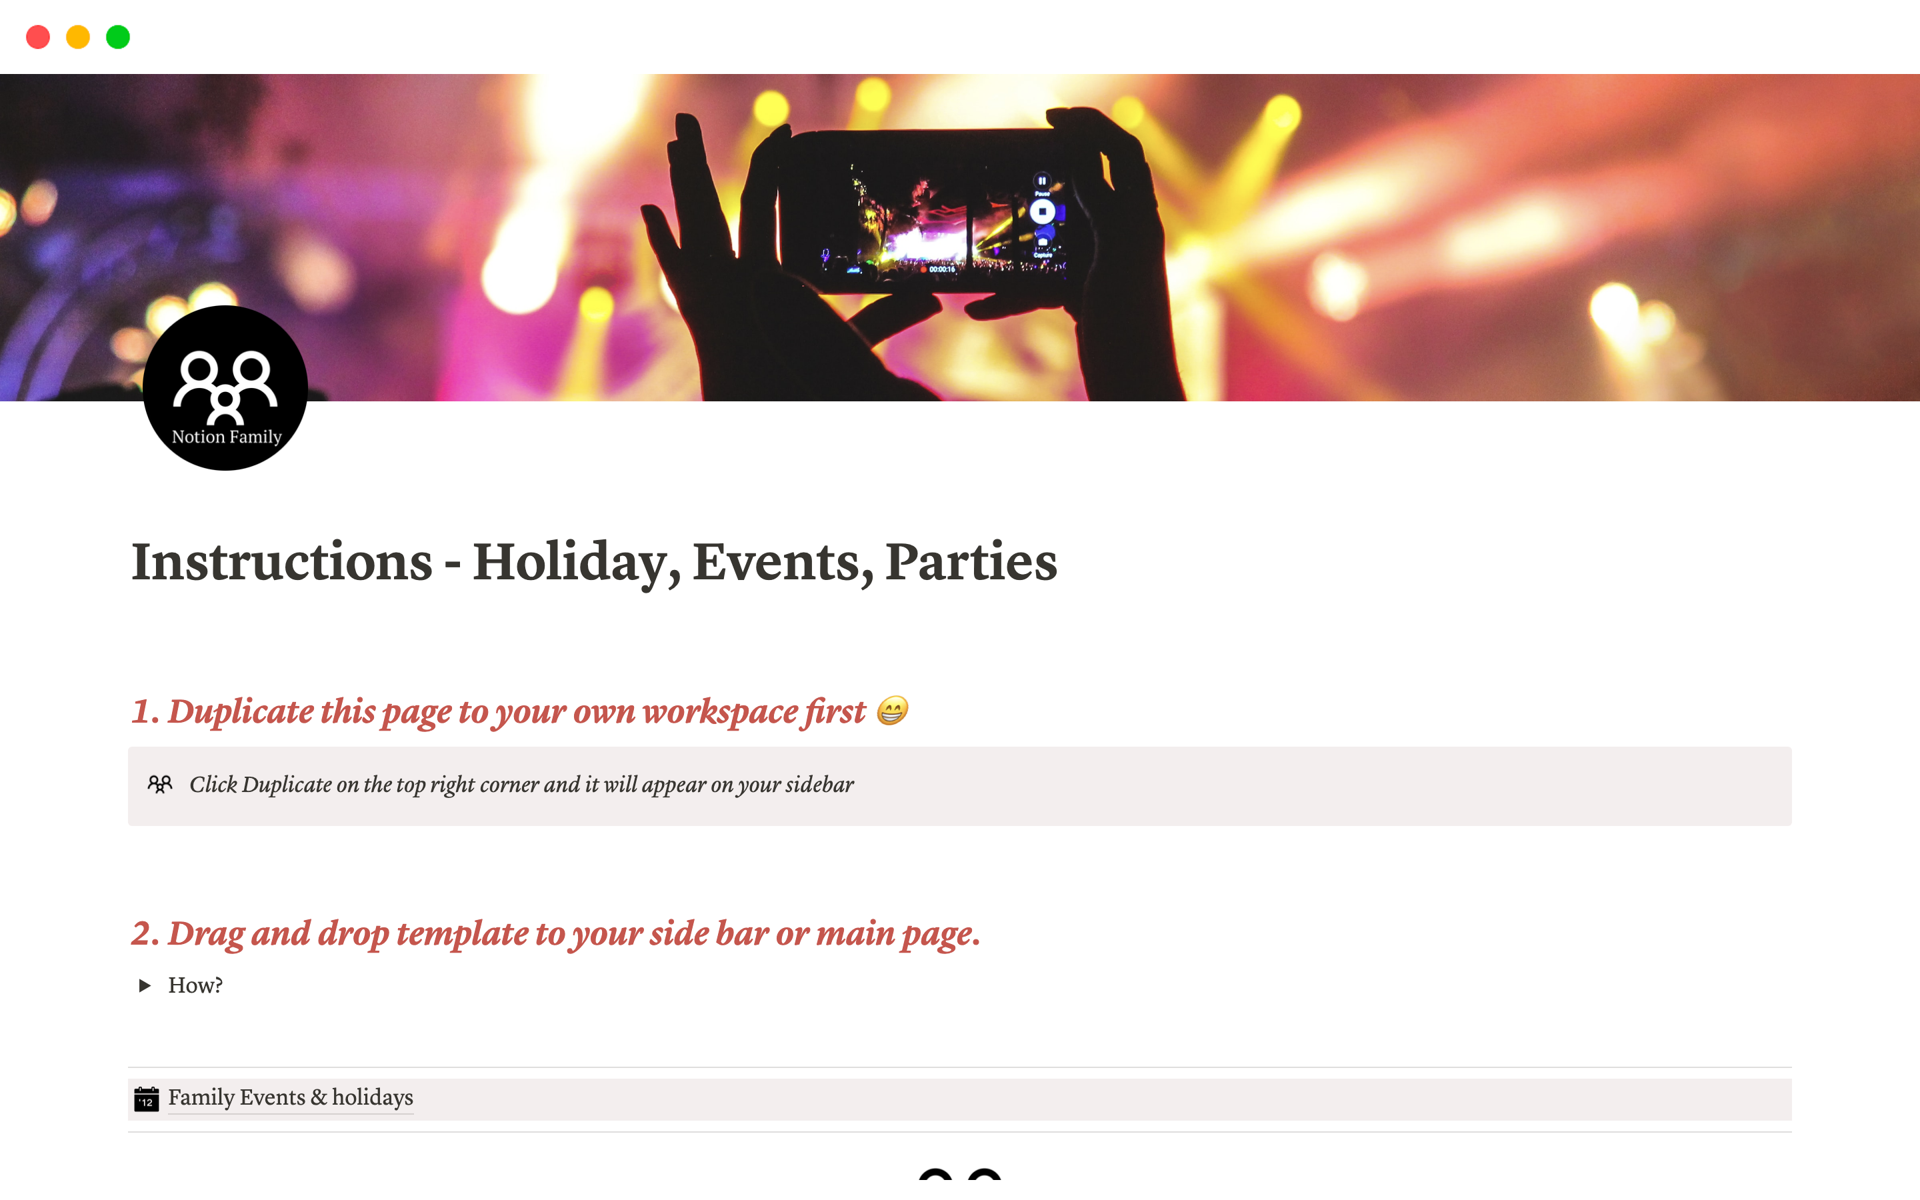 A template preview for Family Holidays, Events and Parties